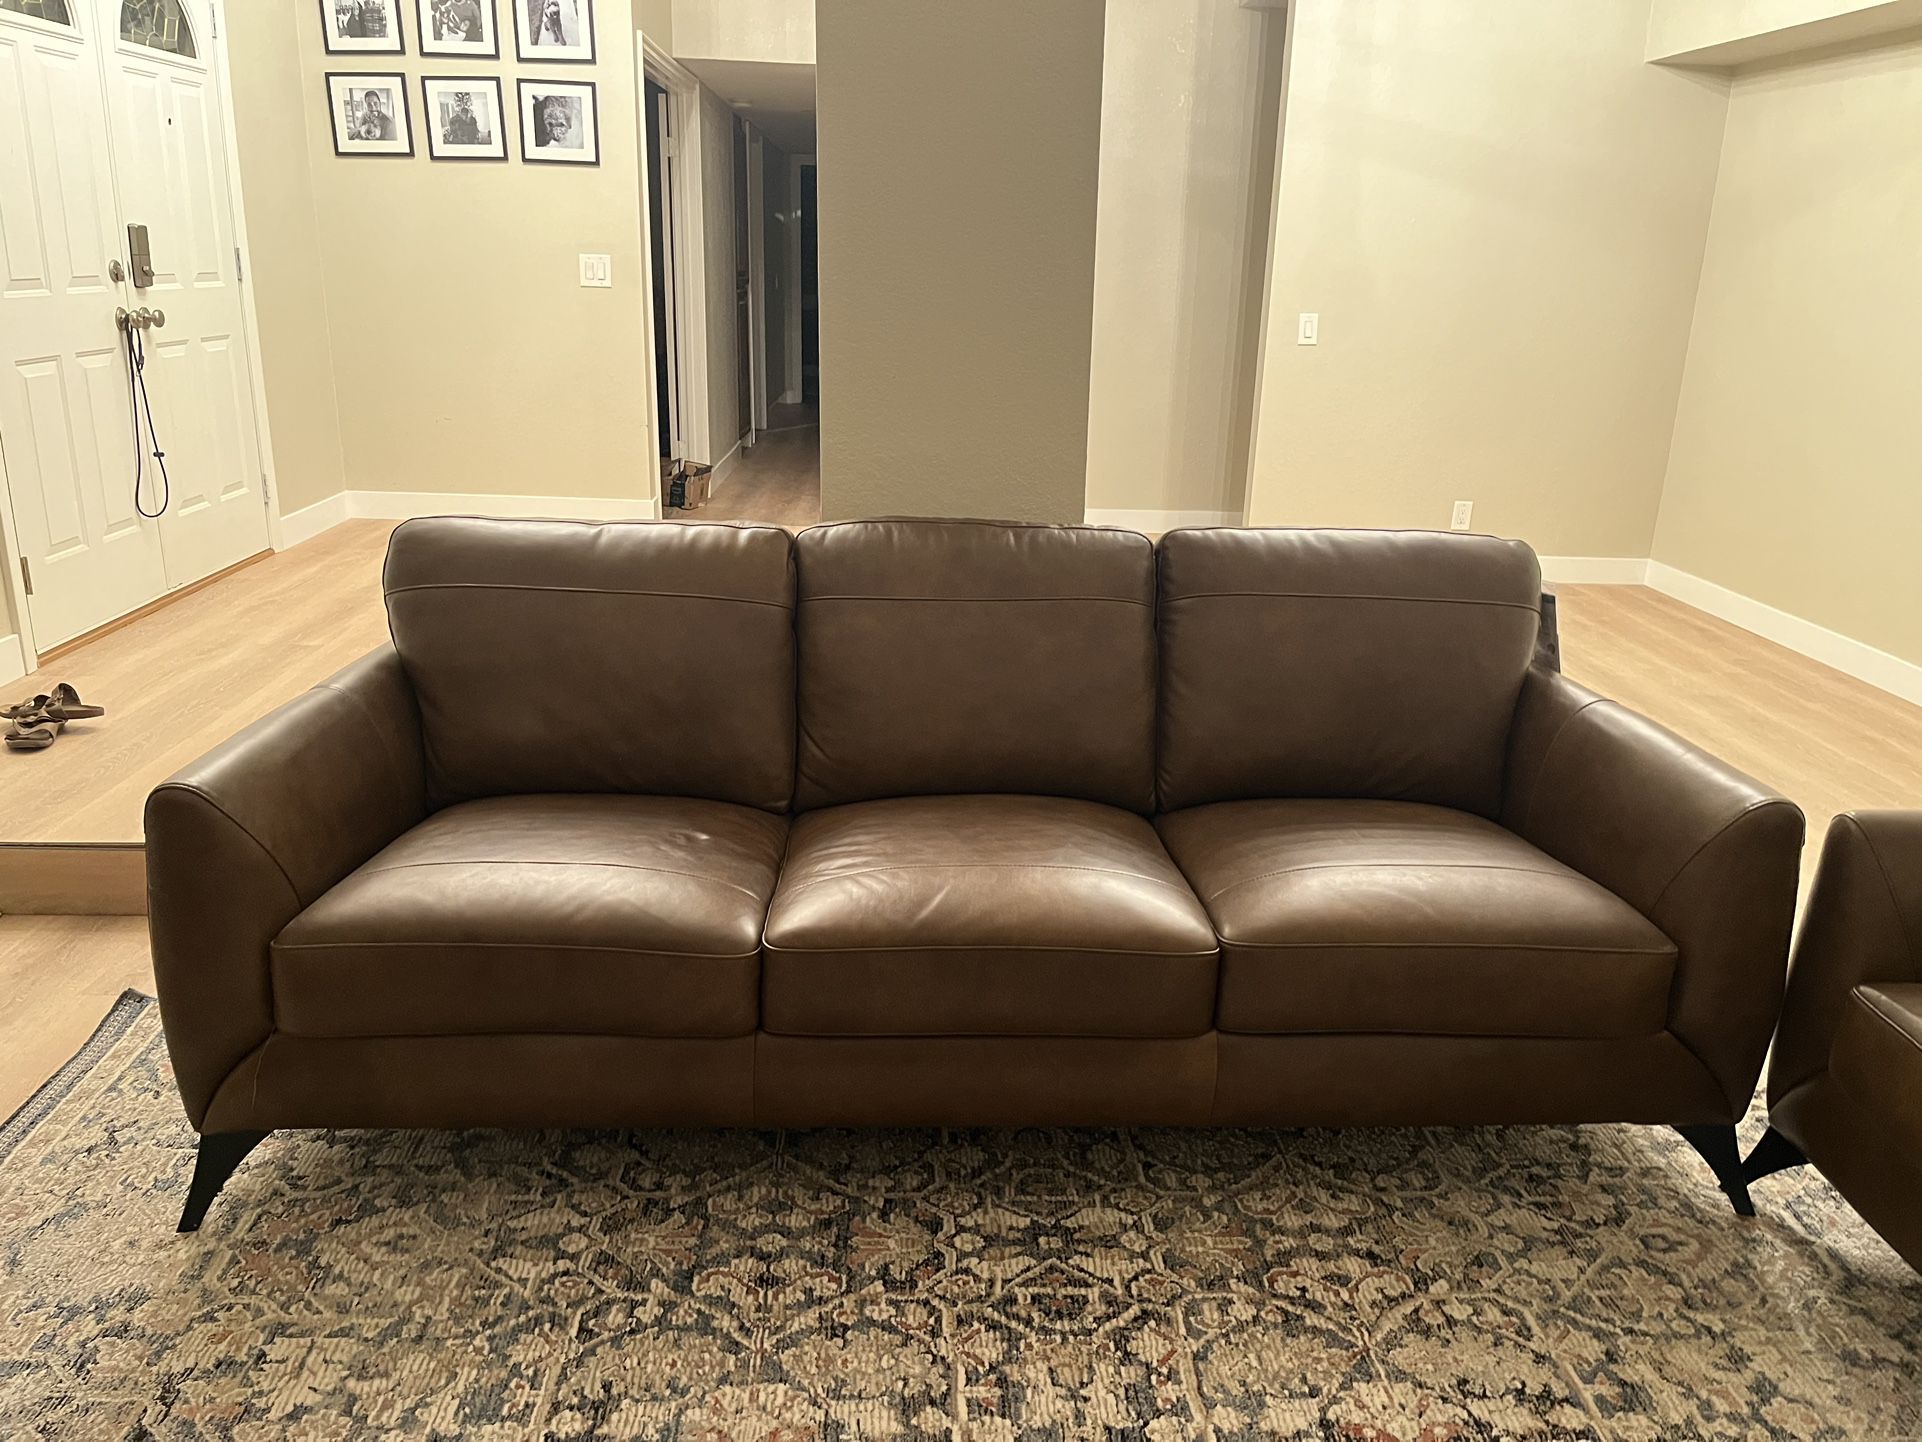 Brown Leather Couches Sold As A Set Or Separately 